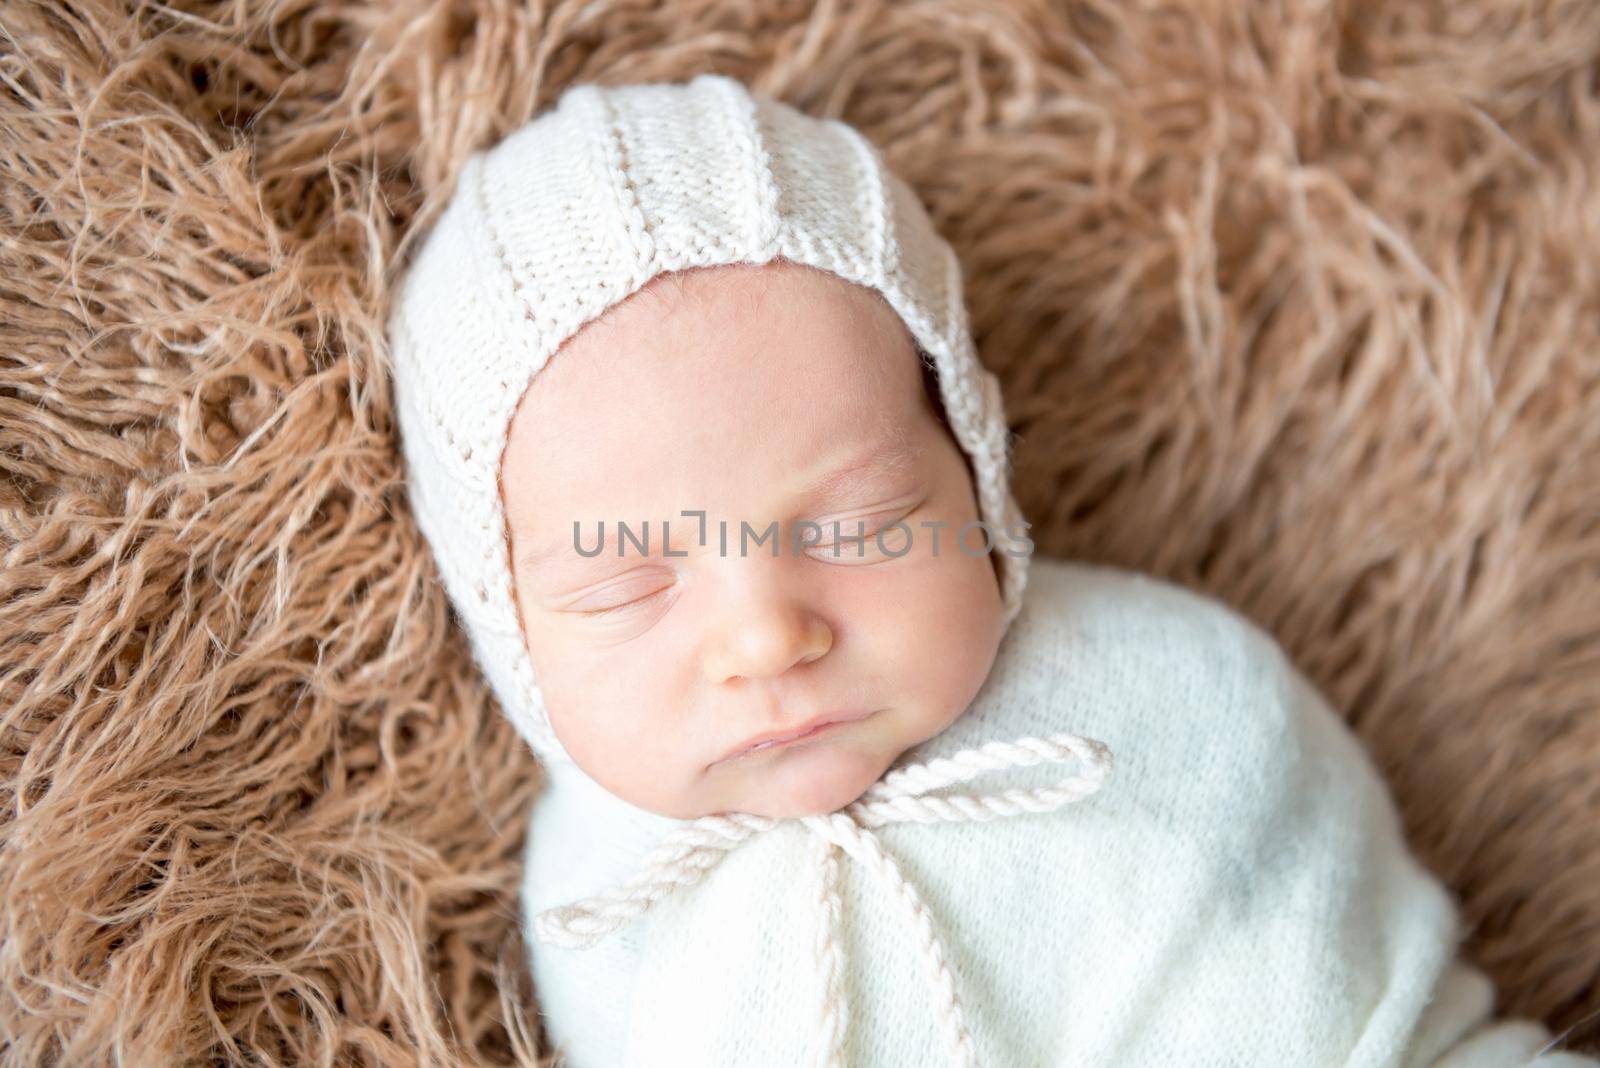 Newborn child swaddled in a white woolen cloth is sleeping on brown fluffy plaid